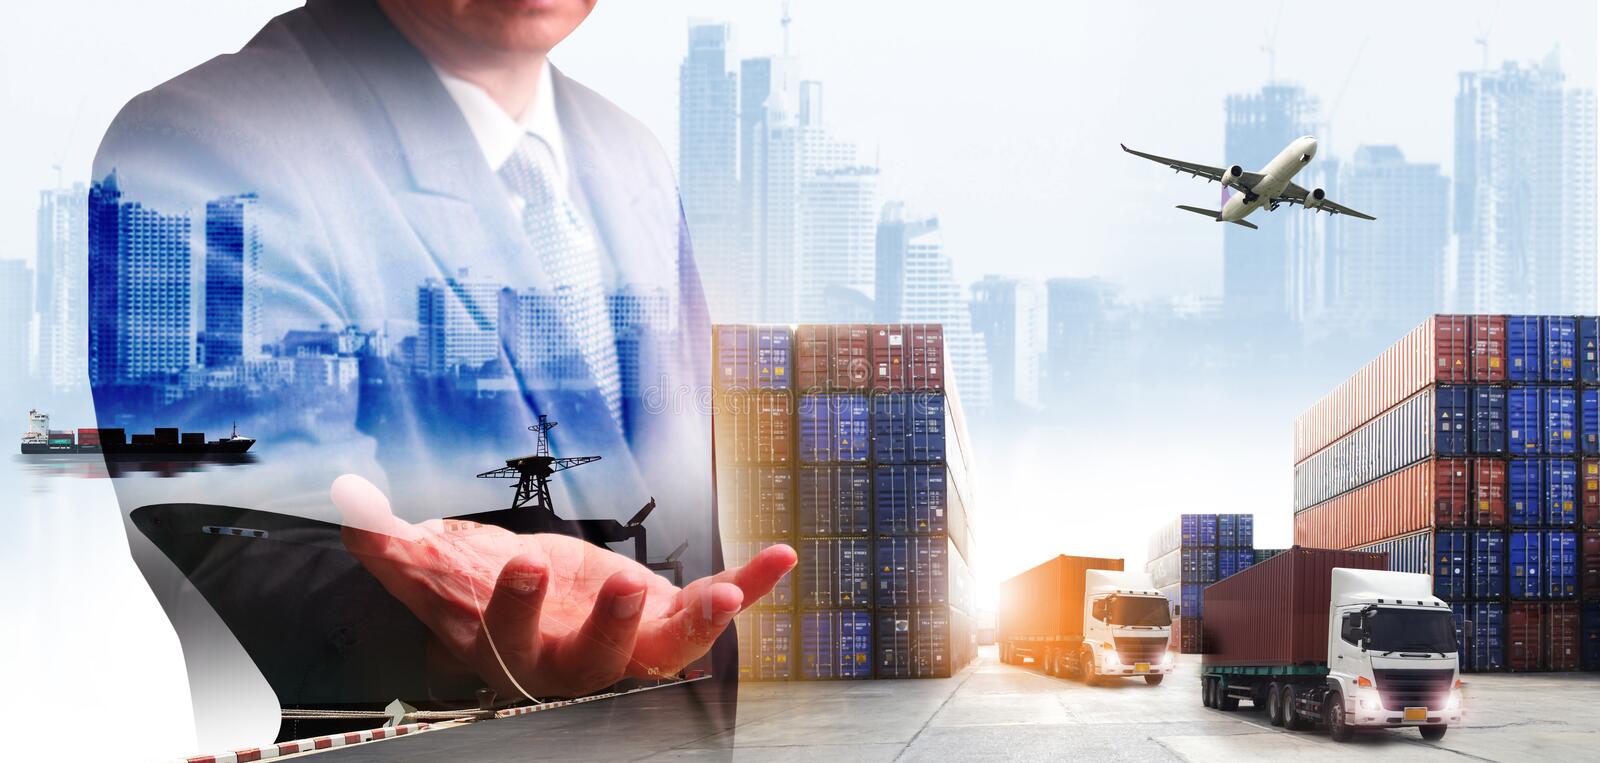 world-logistics-background-transportation-double-exposure-businessman-industry-safety-concept-container-truck-231496965